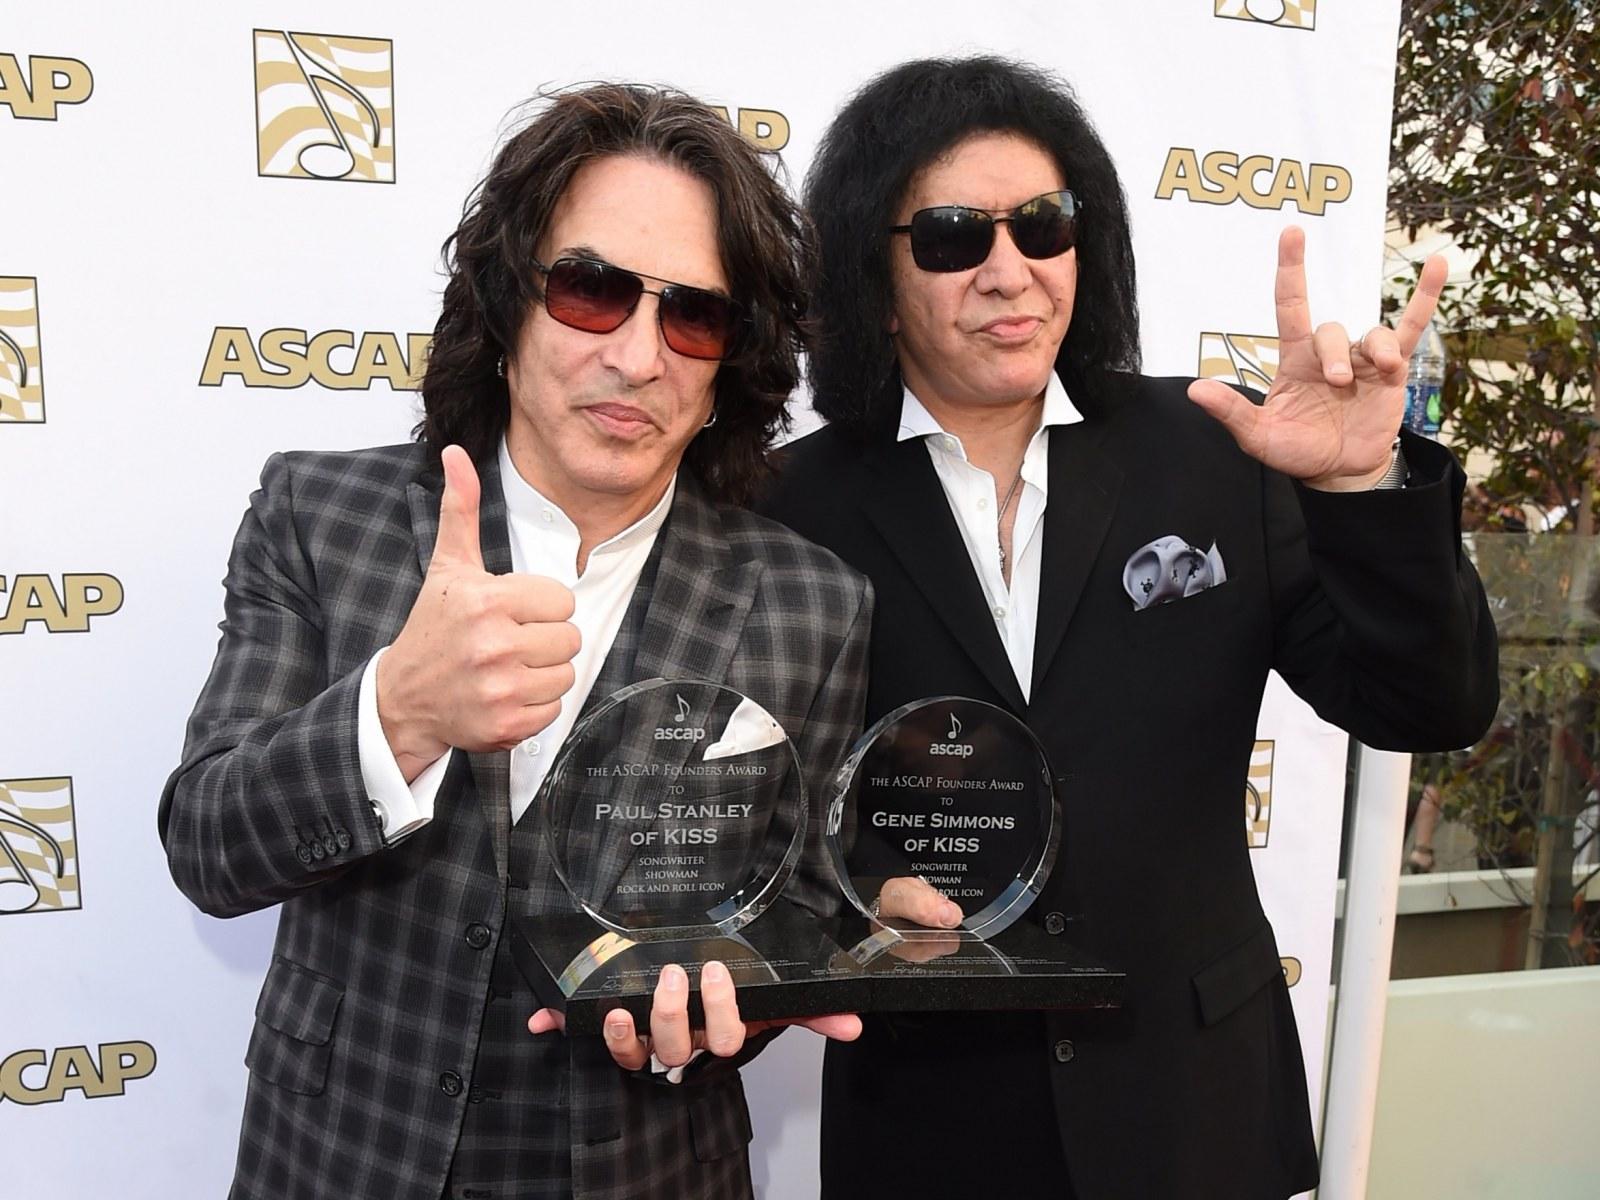 Gene Simmons's Wife, Paul Stanley Clash Over Prince Remarks